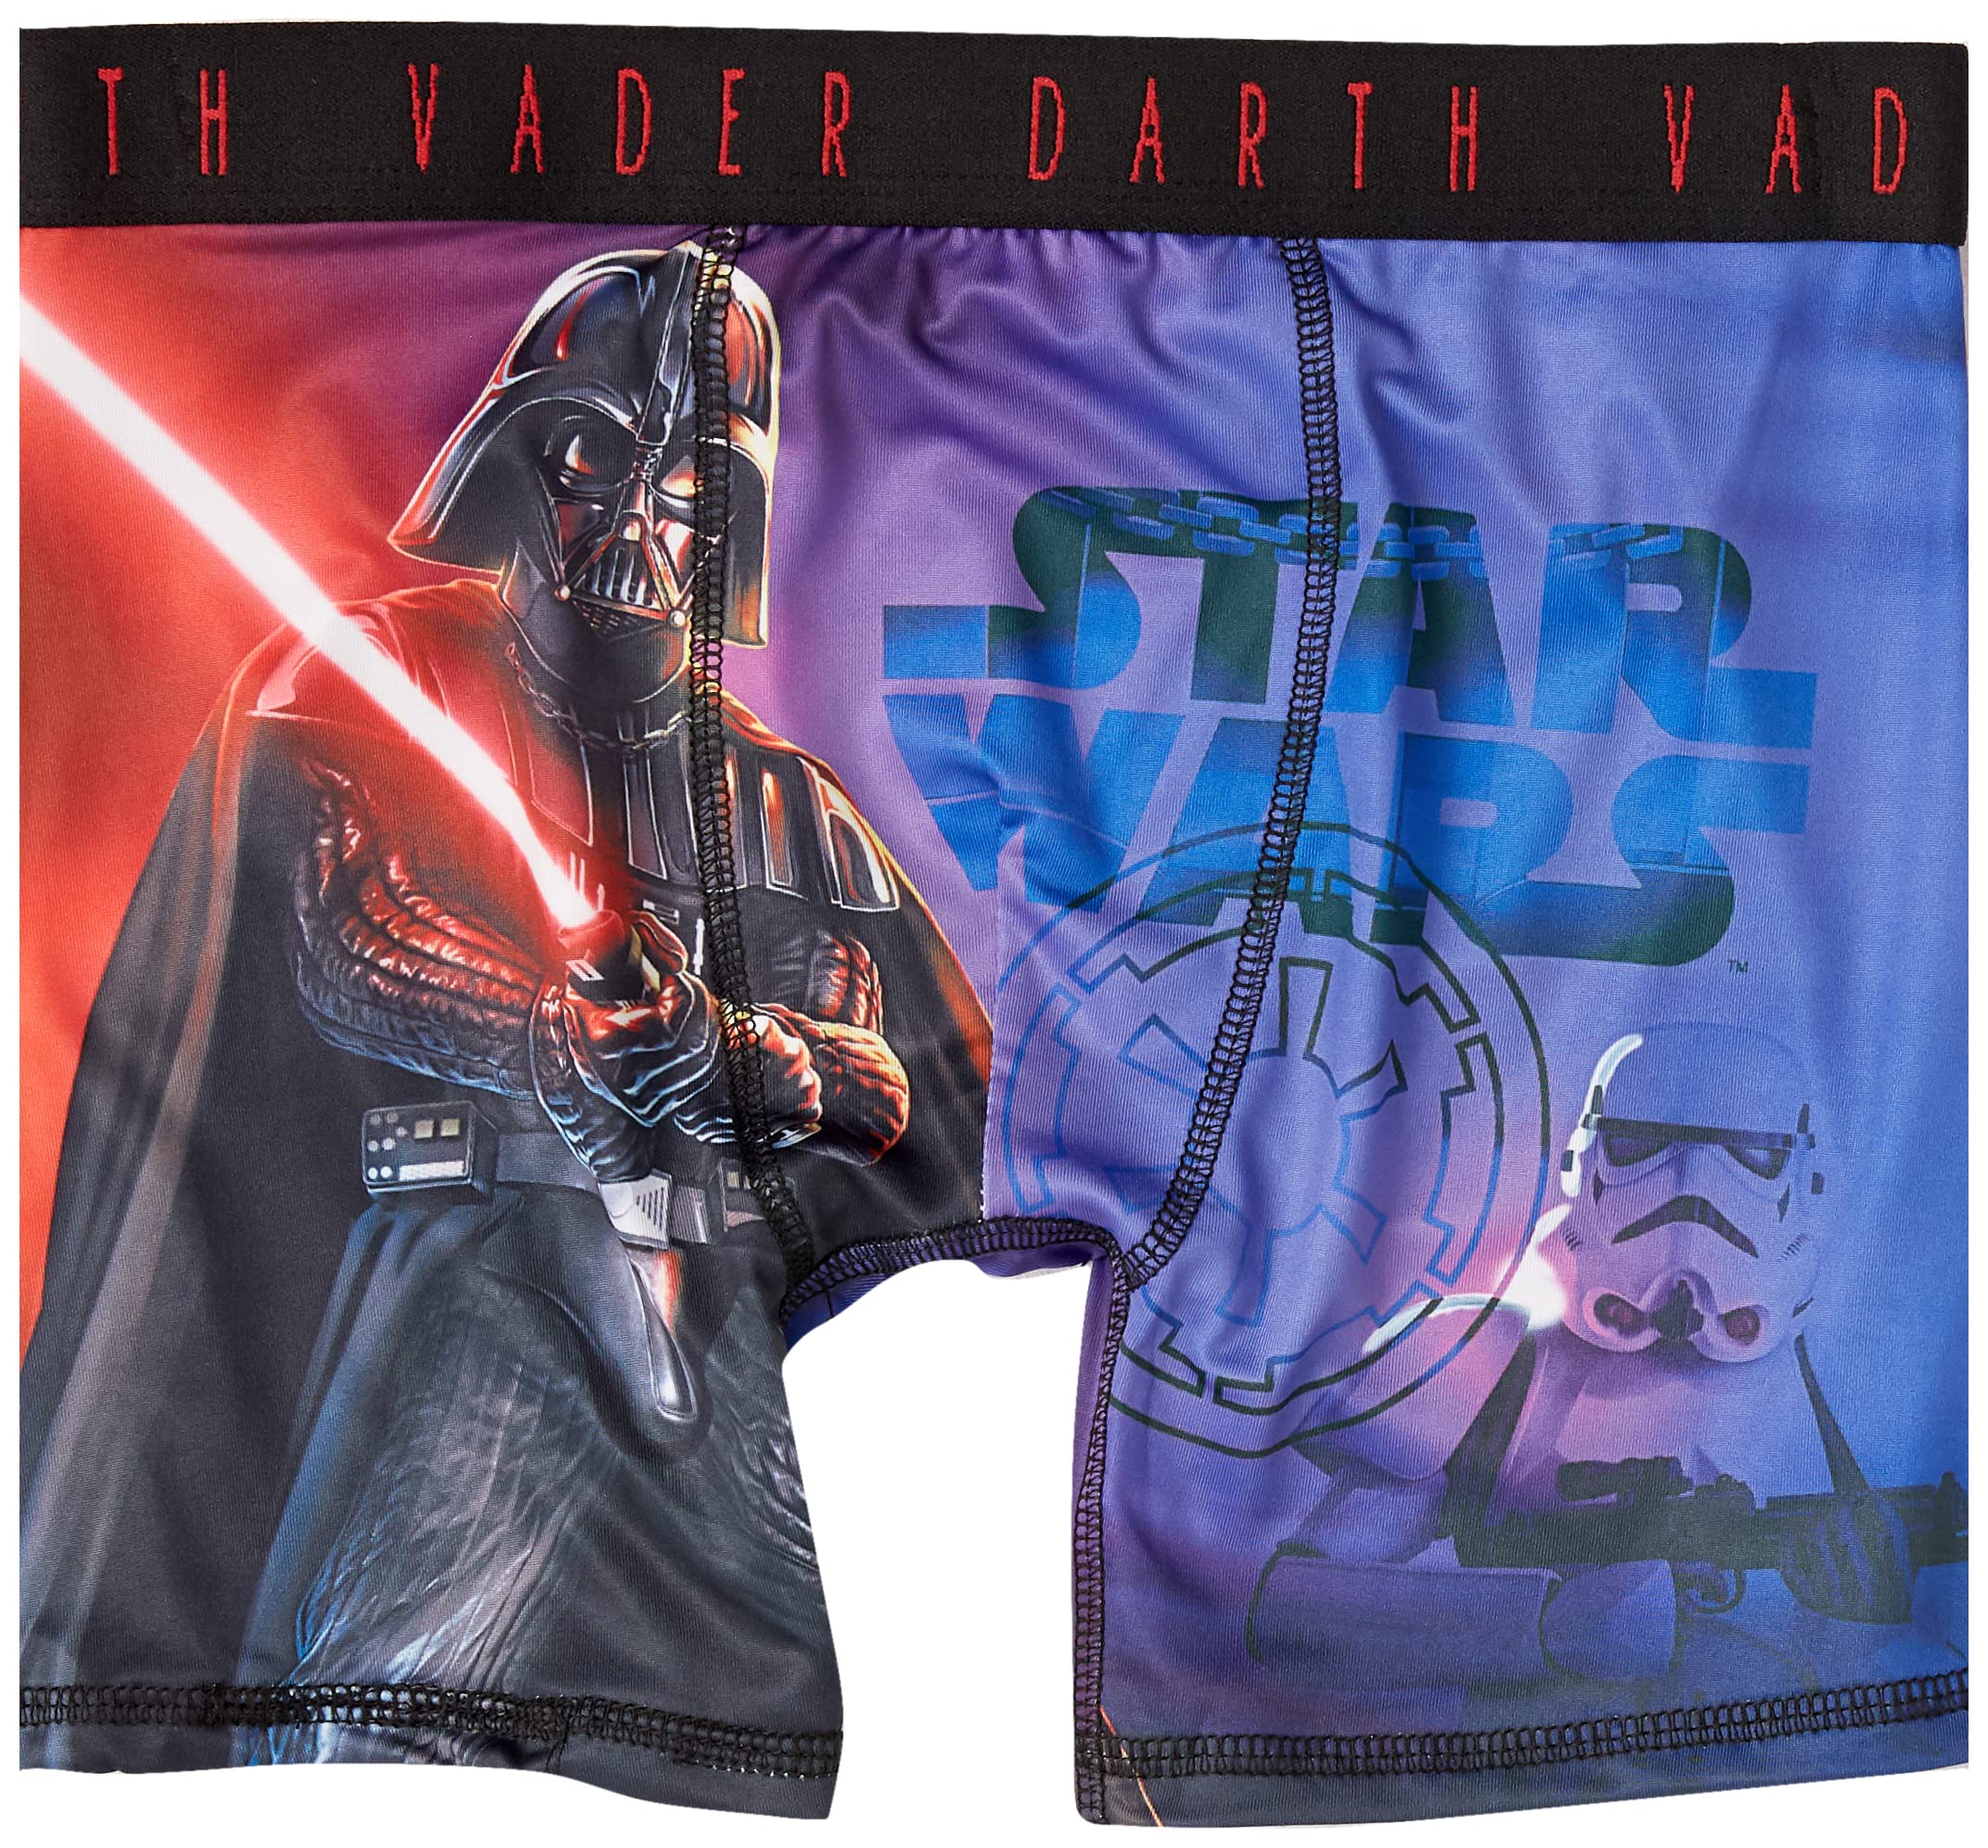 STAR WARS Boys' Big 100% Combed Cotton Poly-Blend Athletic Boxer Briefs in Sizes 4, 6, 8, 10 and 12